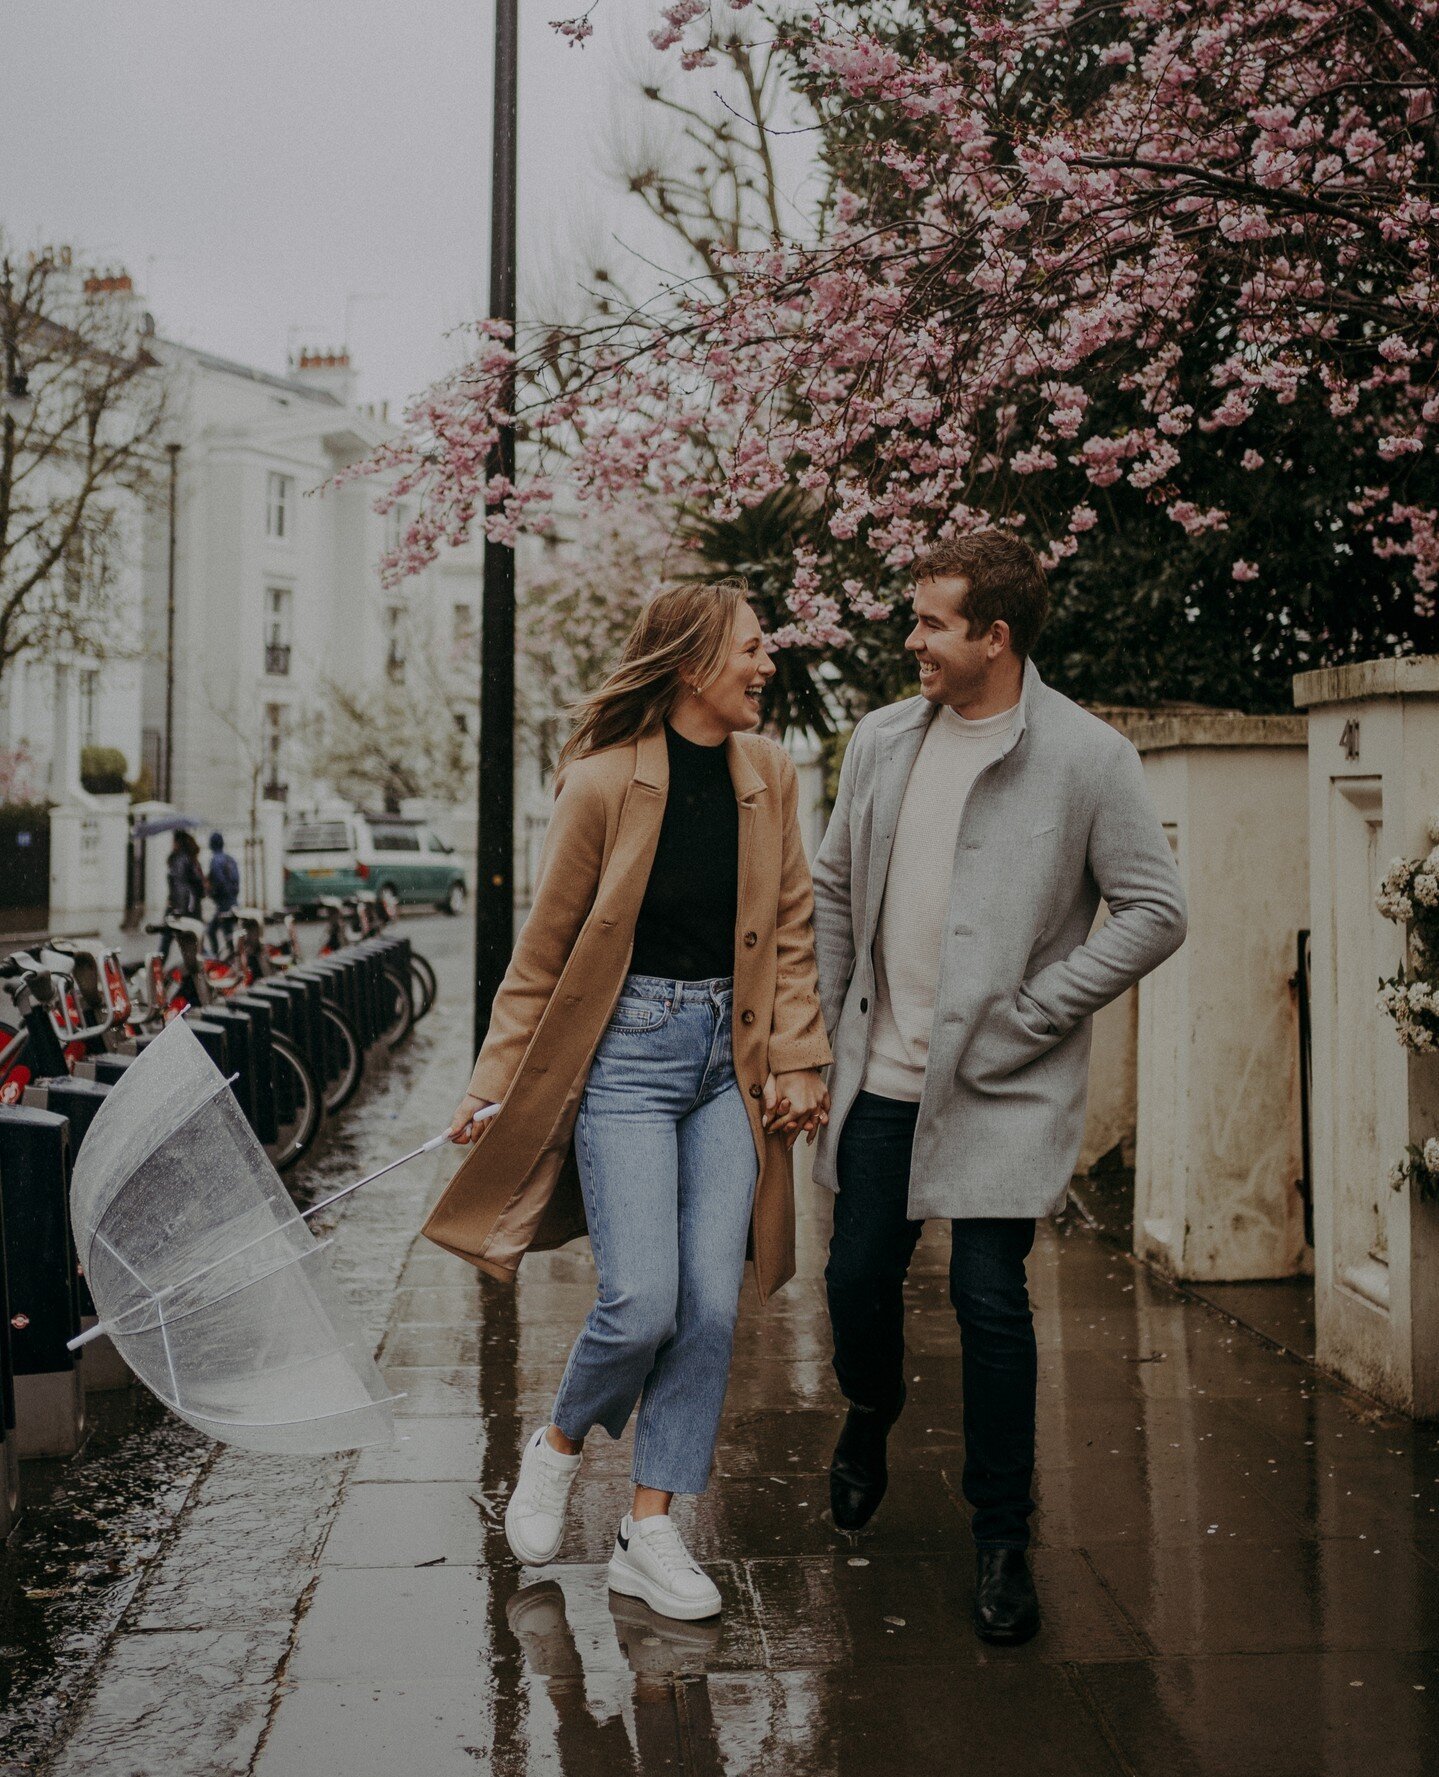 Lauren + Will proving shooting in the rain can be fun + pretty ☔️ plus the cherry blossom is in full bloom right now 🌸 a must see if you're in Nottinghill 😍 Congratulations on getting engaged lovelies 🤗⁠
⁠
⁠
#coupleshoot #coupleportrait #engagemen